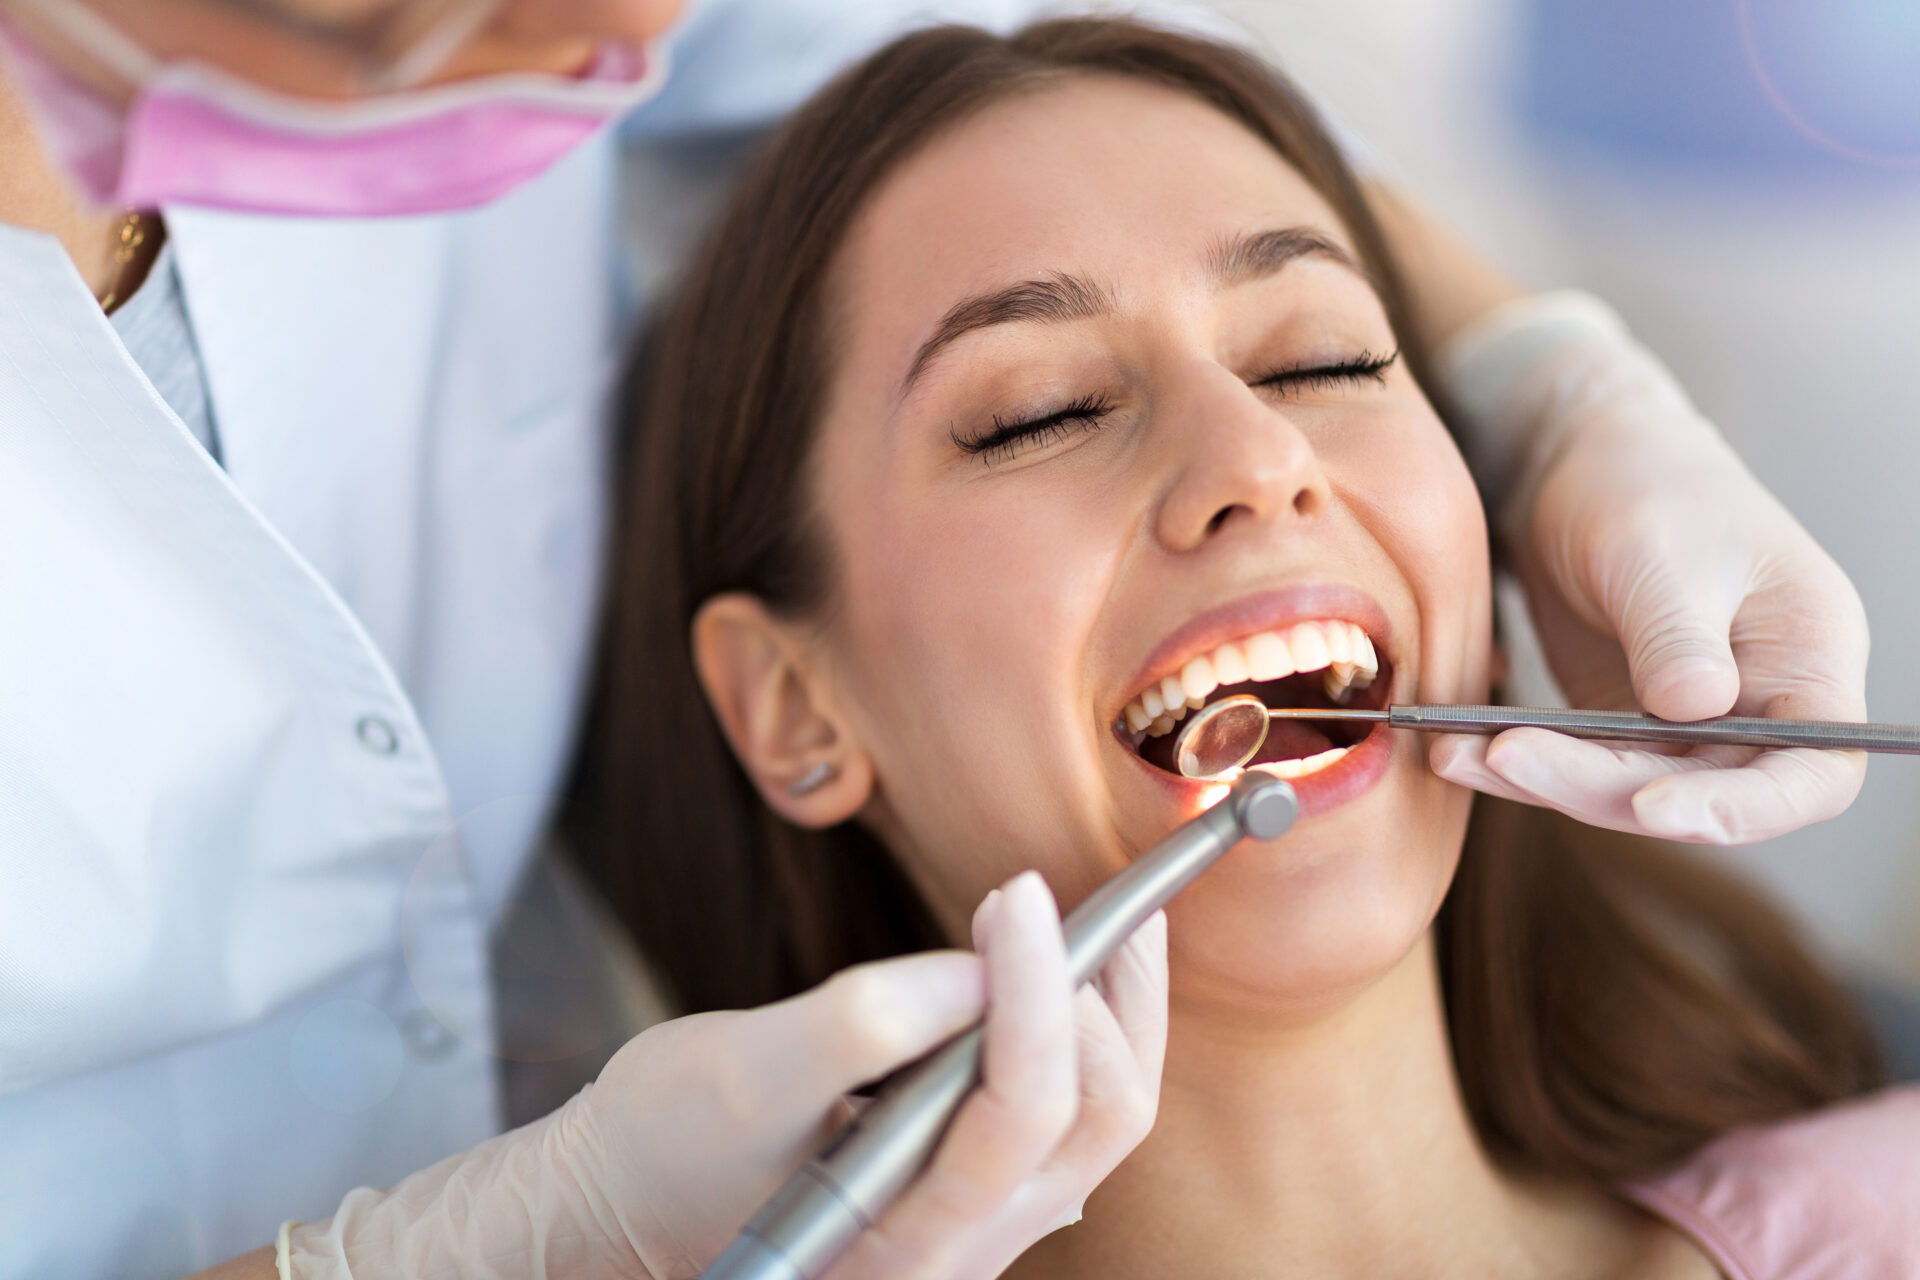 Teeth cleaning in Uptown, Chicago, IL